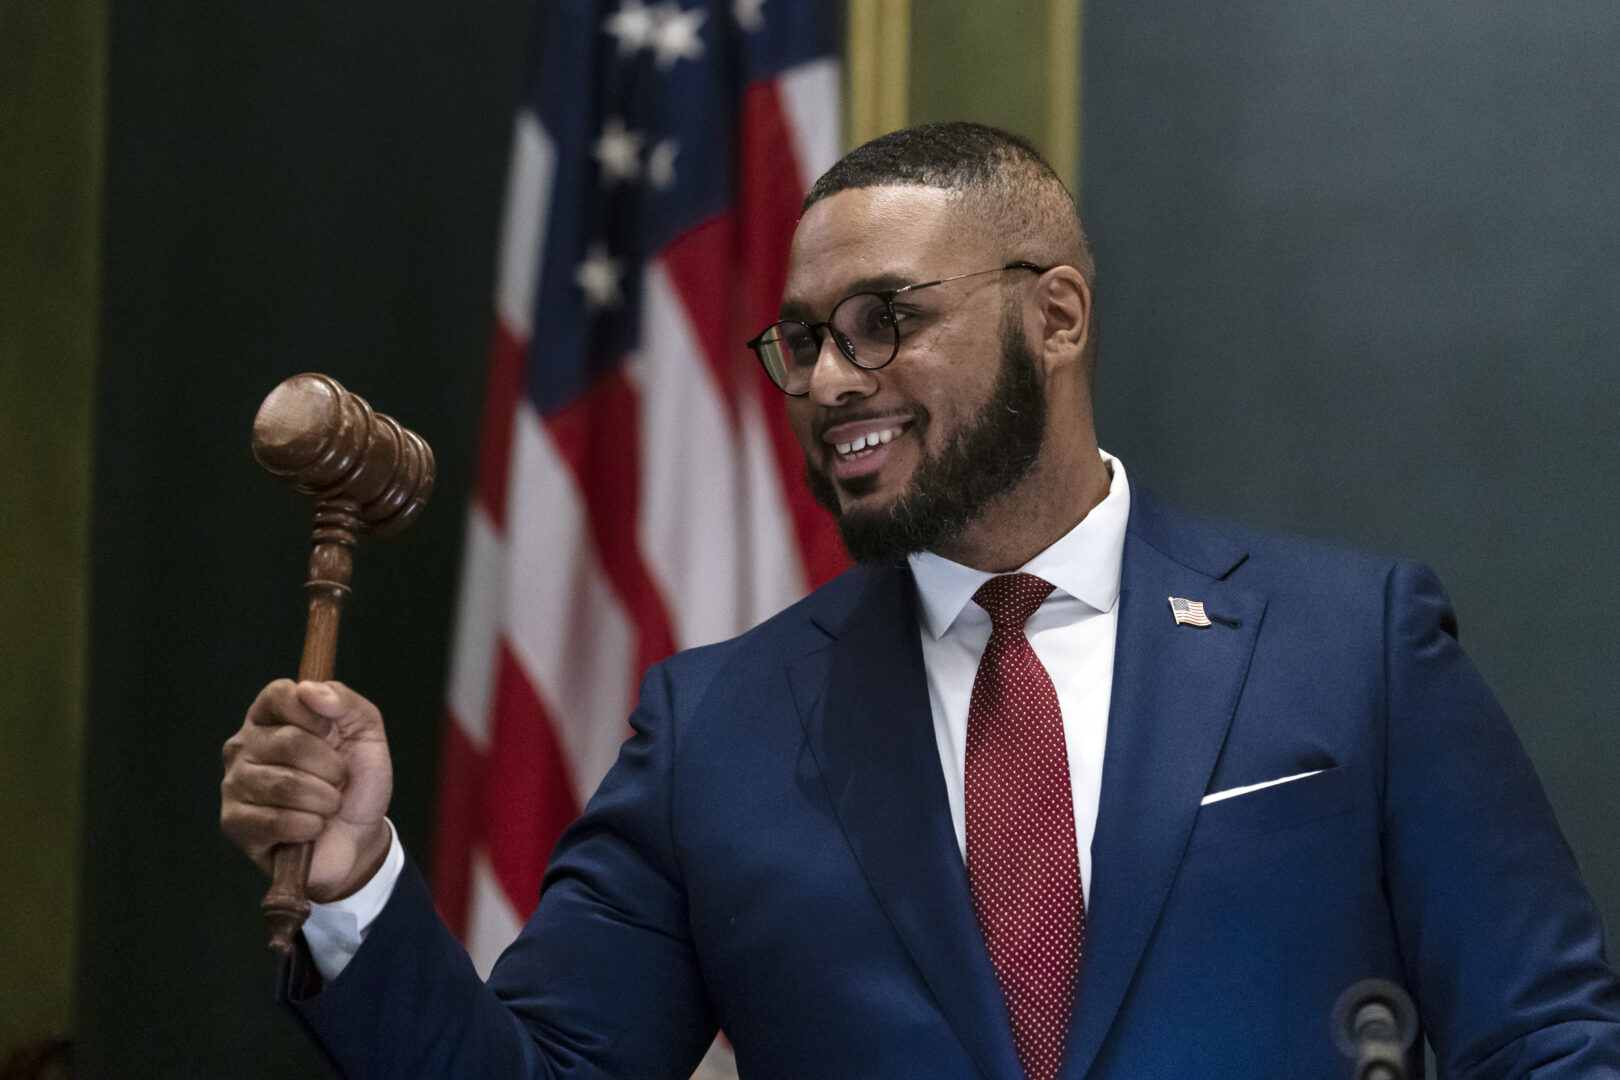 Democratic Lt. Gov. Austin Davis holds up the Senate gavel after becoming Pennsylvania's first Black lieutenant governor, Tuesday, Jan. 17, 2023, at the state Capitol in Harrisburg, Pa. (AP Photo/Matt Rourke)